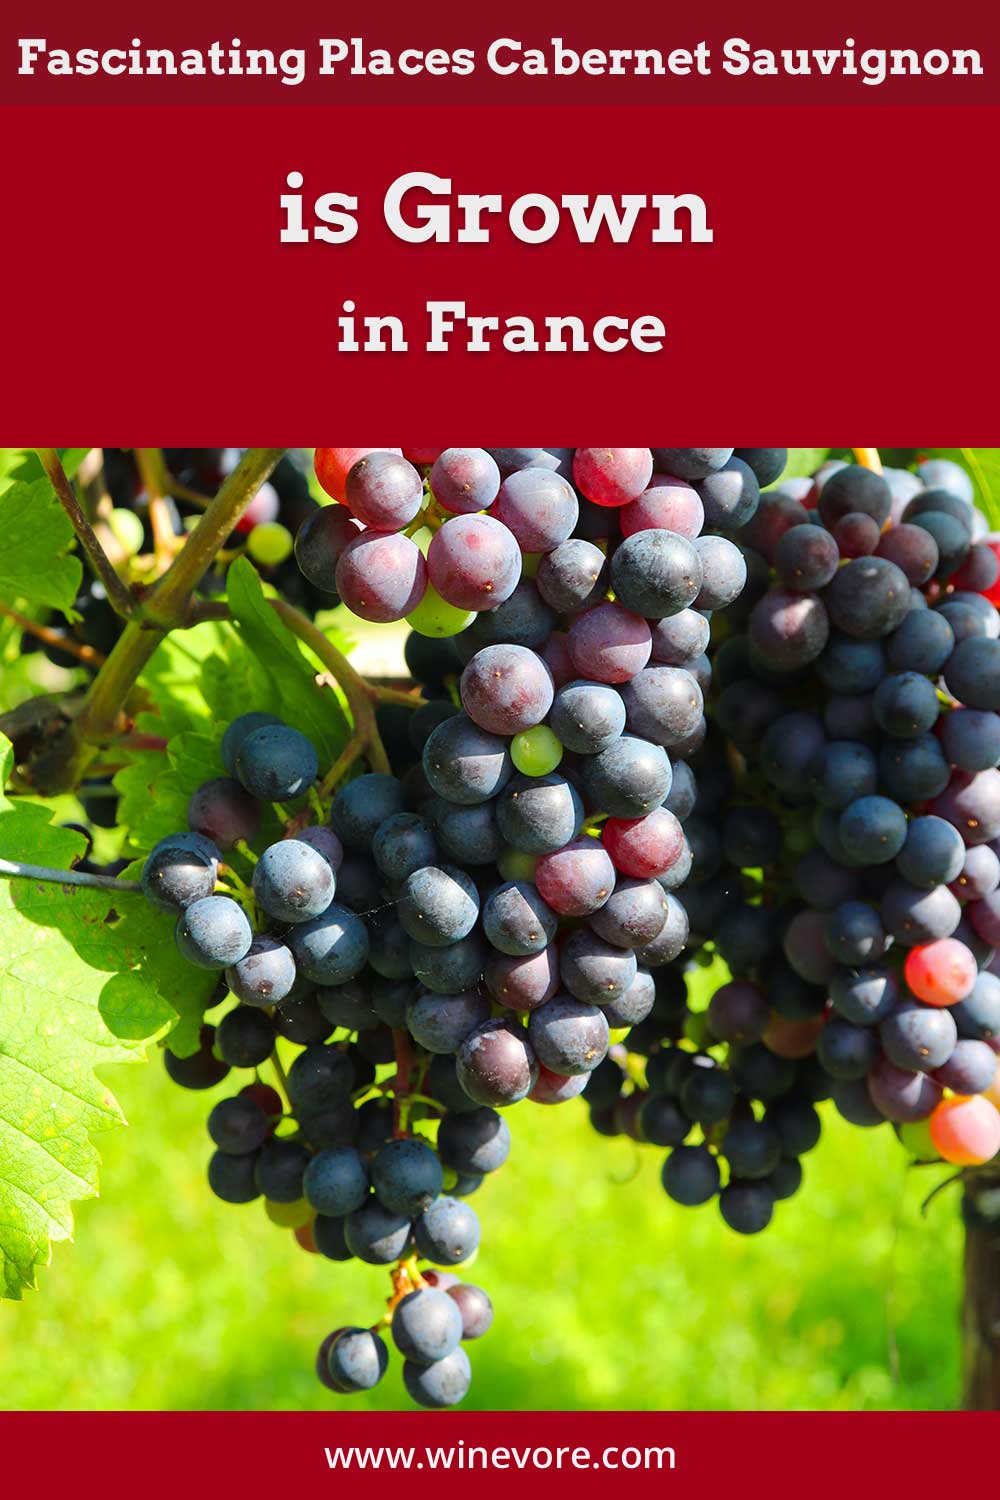 Bunch of grapes on a tree - Places Cabernet Sauvignon is Grown in France.